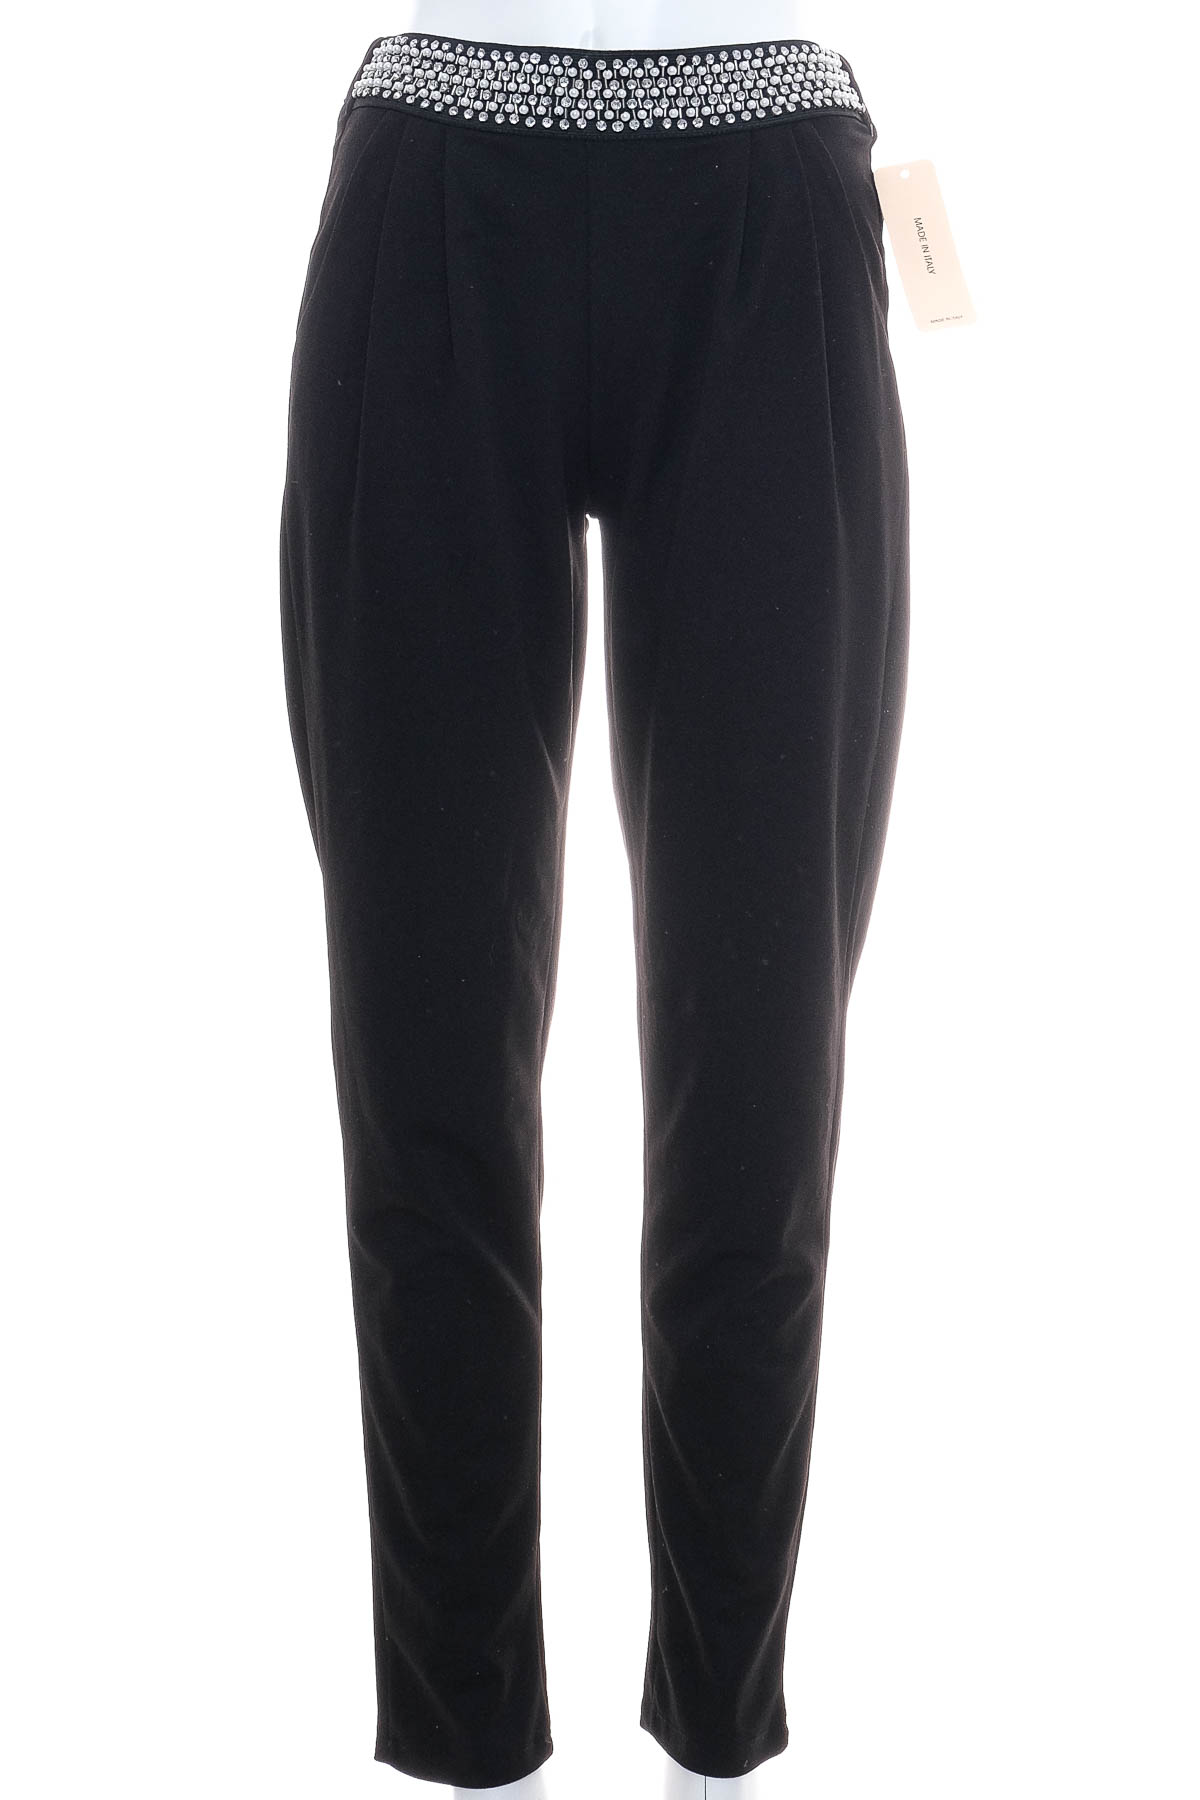 Women's trousers - New Collection - 0